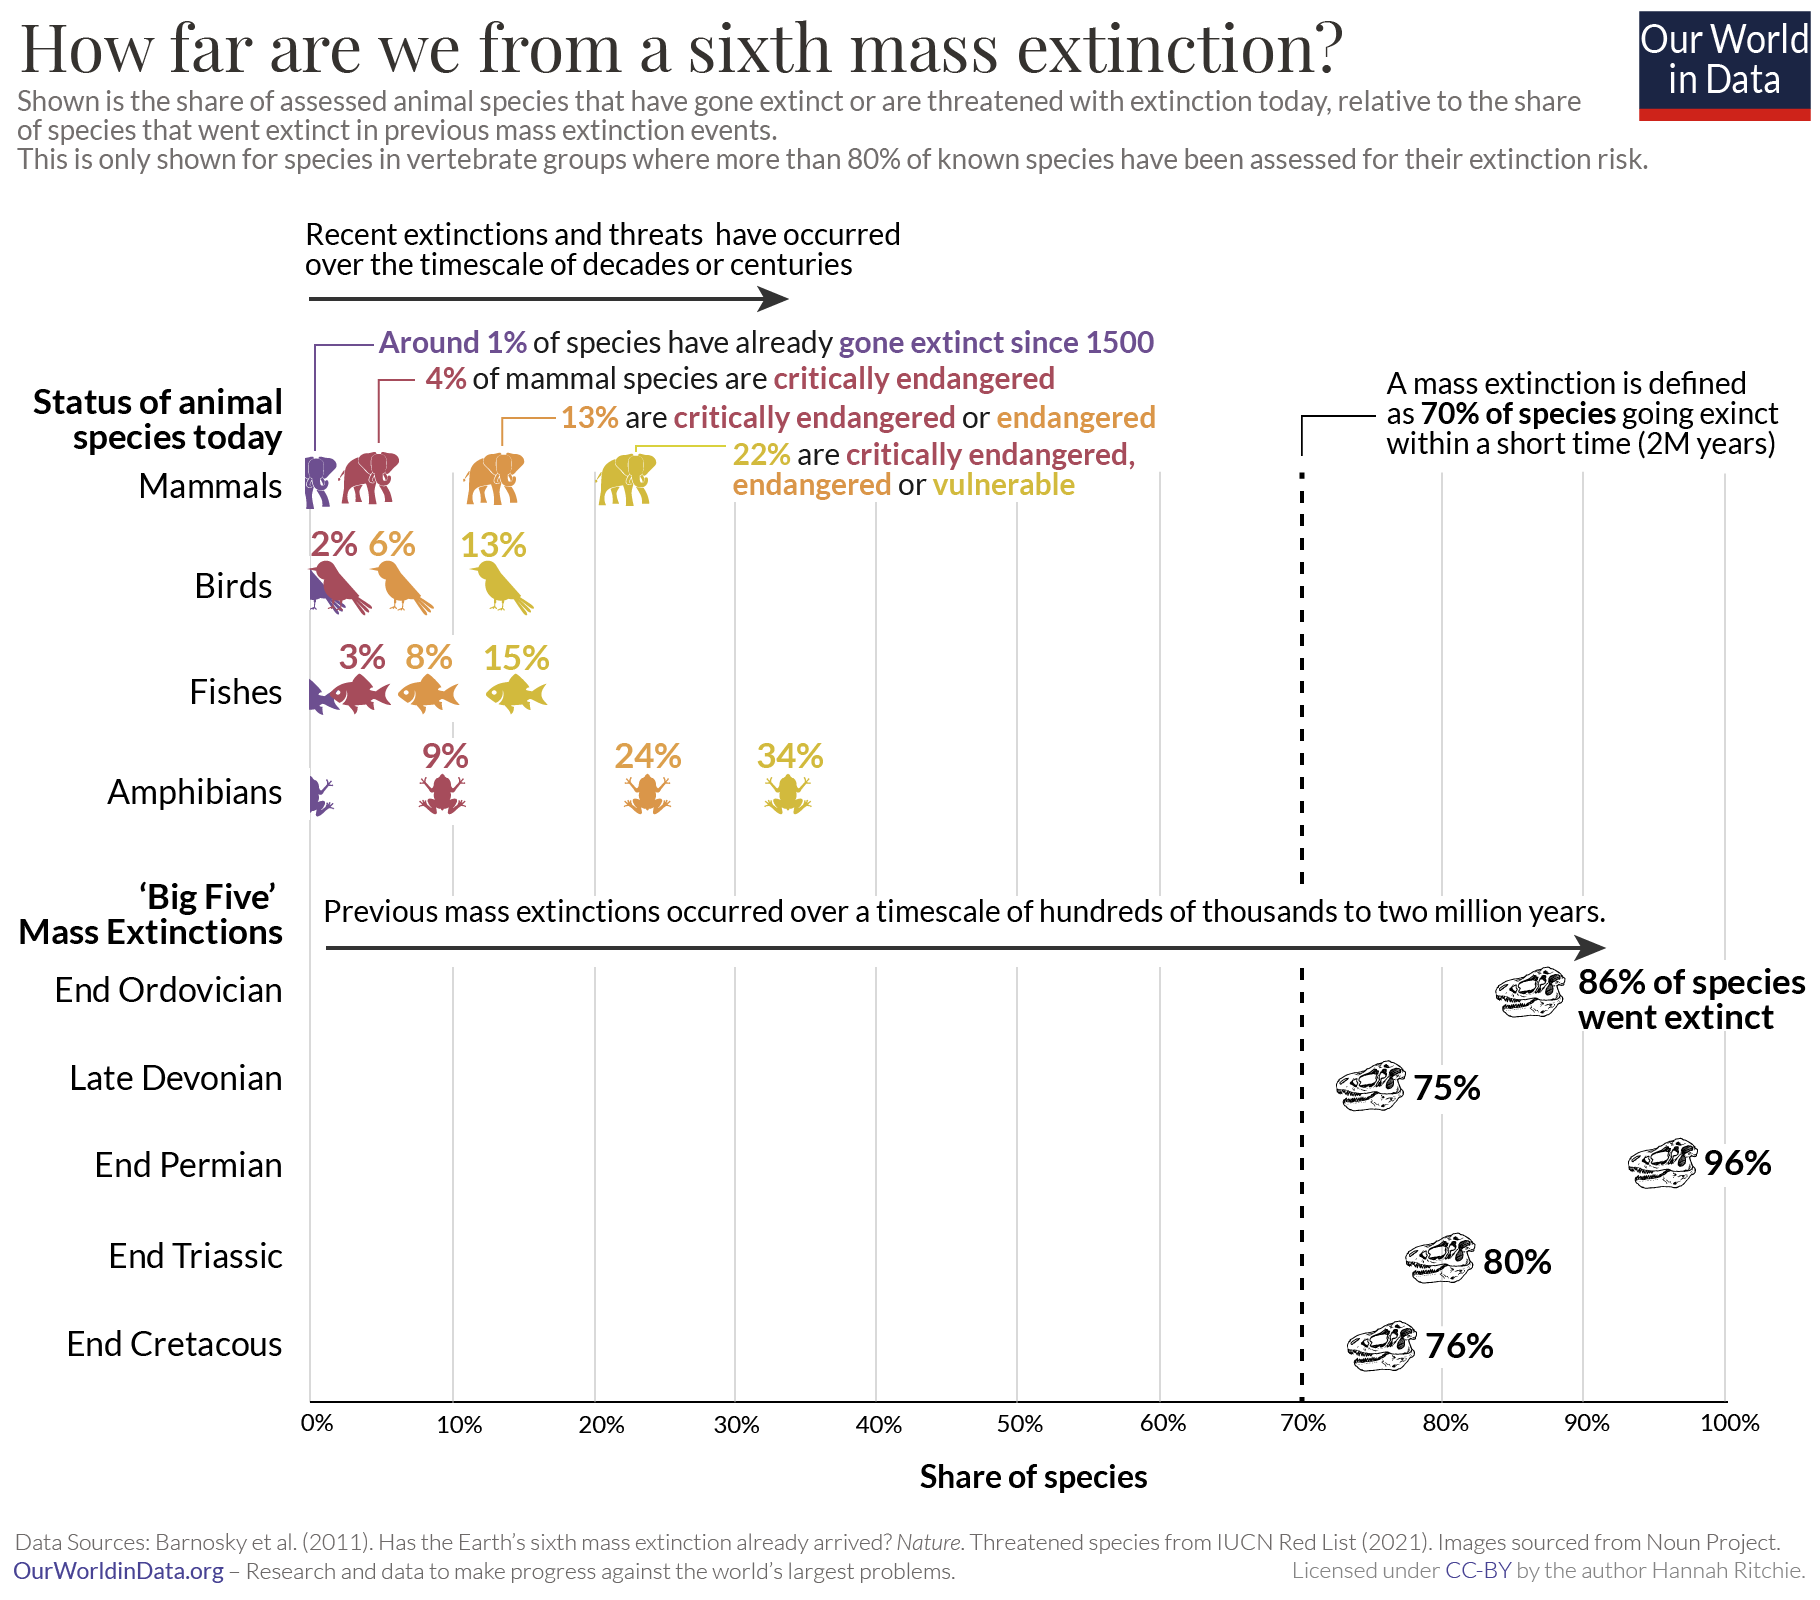 Share of species gone extinct and threatened vs. mass extinctions